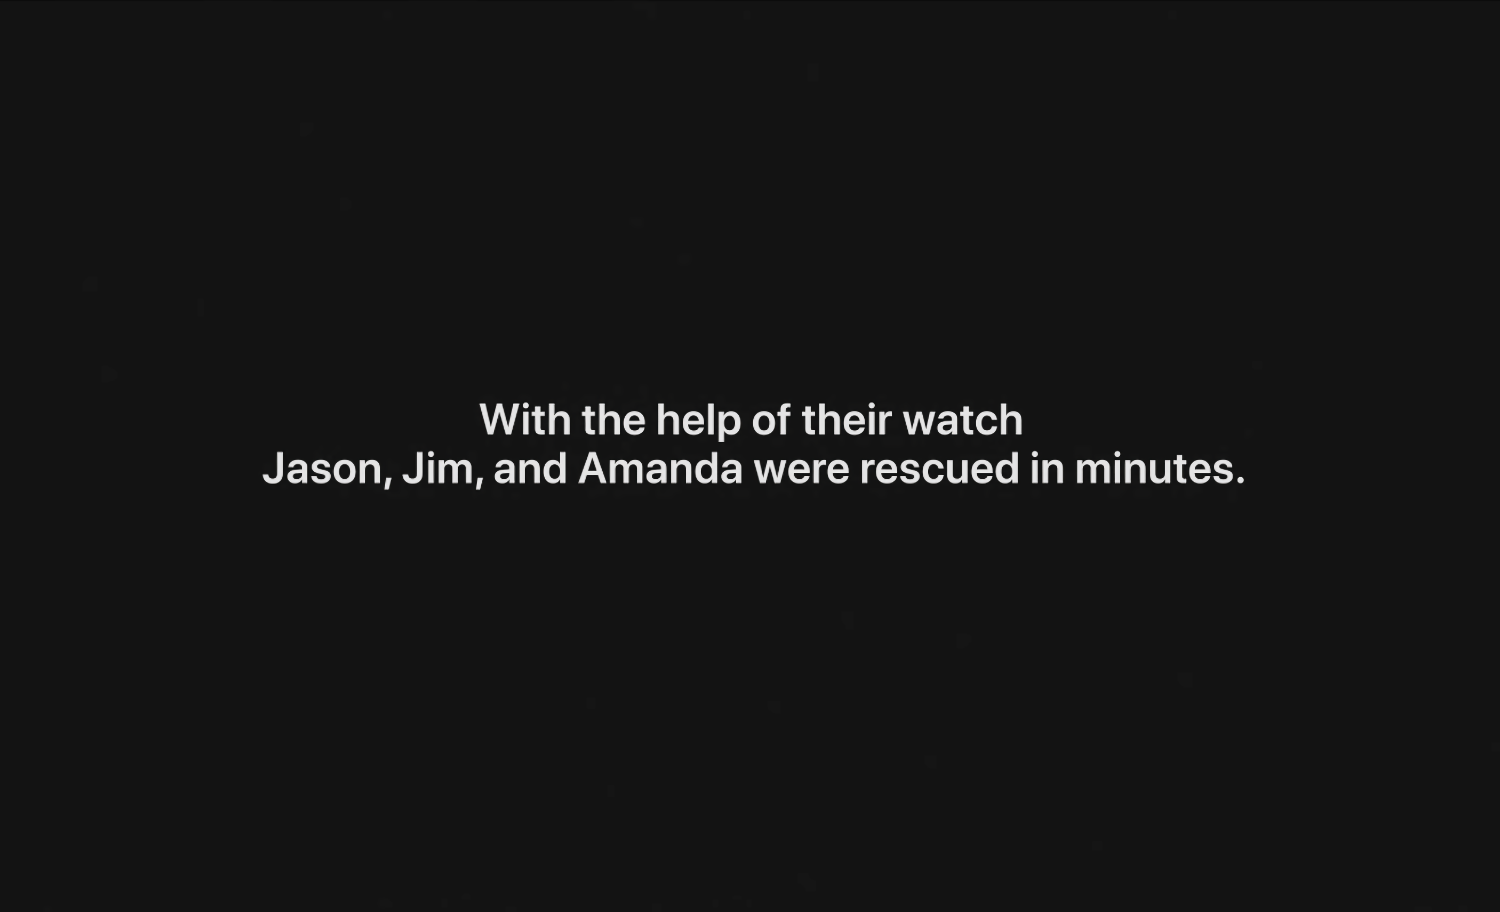 A still image from Apple's ad for Apple Watch Series 7, dubbed "911" with the line "With the help of their watch, Jason, Jim and Amanda were rescued in minutes" displayed in white letters on a black background